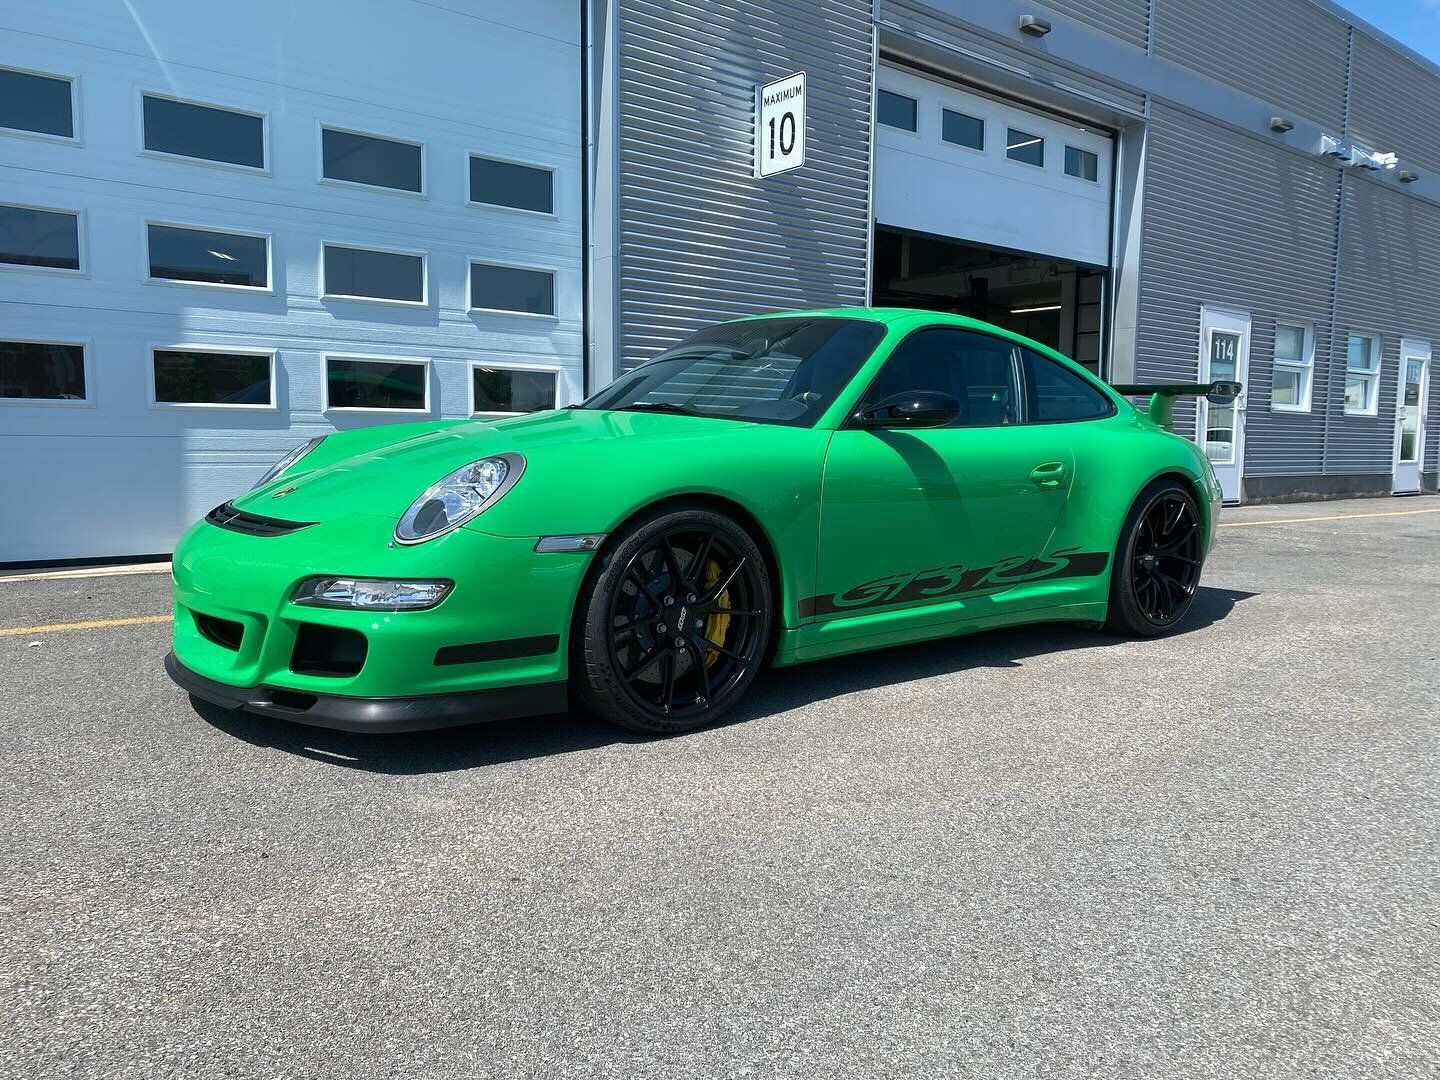 Revving up perfection: 2007 Porsche GT3 RS came in for a full paint protection film makeover and ceramic coating treatment. 🚗✨

Want to protect your ride? Check us out at www.autoartfilms.com

 #AutoArtFilms #porsche #gt3rs #green #cars #carswithout